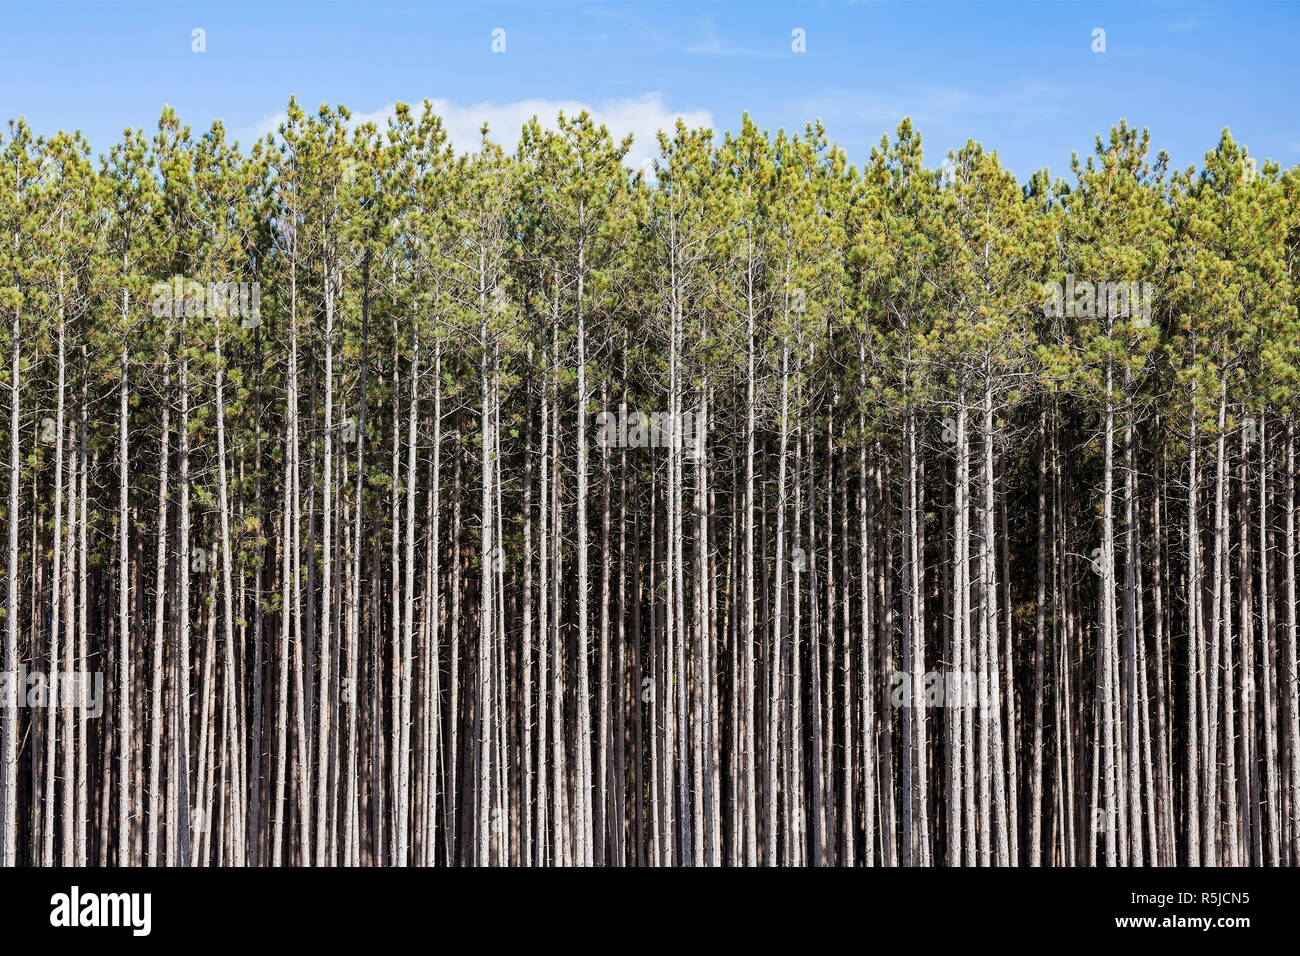 A dense stand of tall pines reaches toward a blue sky in the north woods of Michigan's Upper Peninsula. Stock Photo